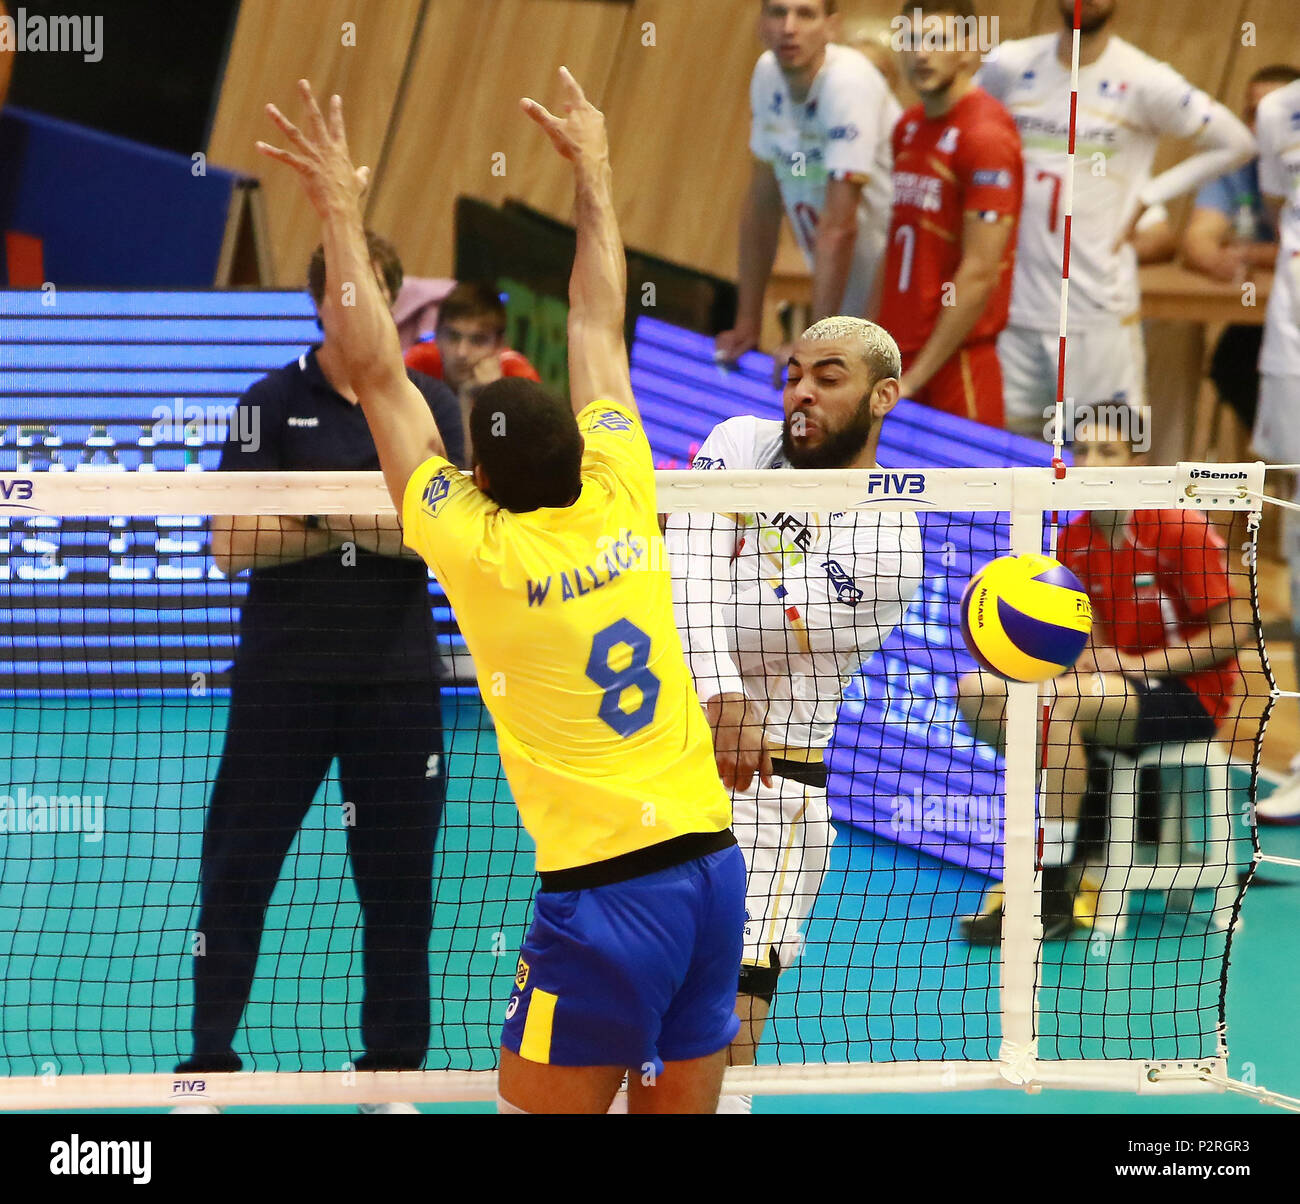 Varna, Bulgaria. 16th June, 2018. from left Wallace de SOUZA (Brazil), Earvin NGAPETH (France), .mens Volleyball Nations League, week 4, Brazil vs Francel, Palace of culture and sport, Varna/Bulgaria, June 16, 2018, the fourth of 5 weekends of the preliminary lap in the new established mens Volleyball Nationas League takes place in Varna/Bulgaria. Credit: Wolfgang Fehrmann/ZUMA Wire/Alamy Live News Stock Photo